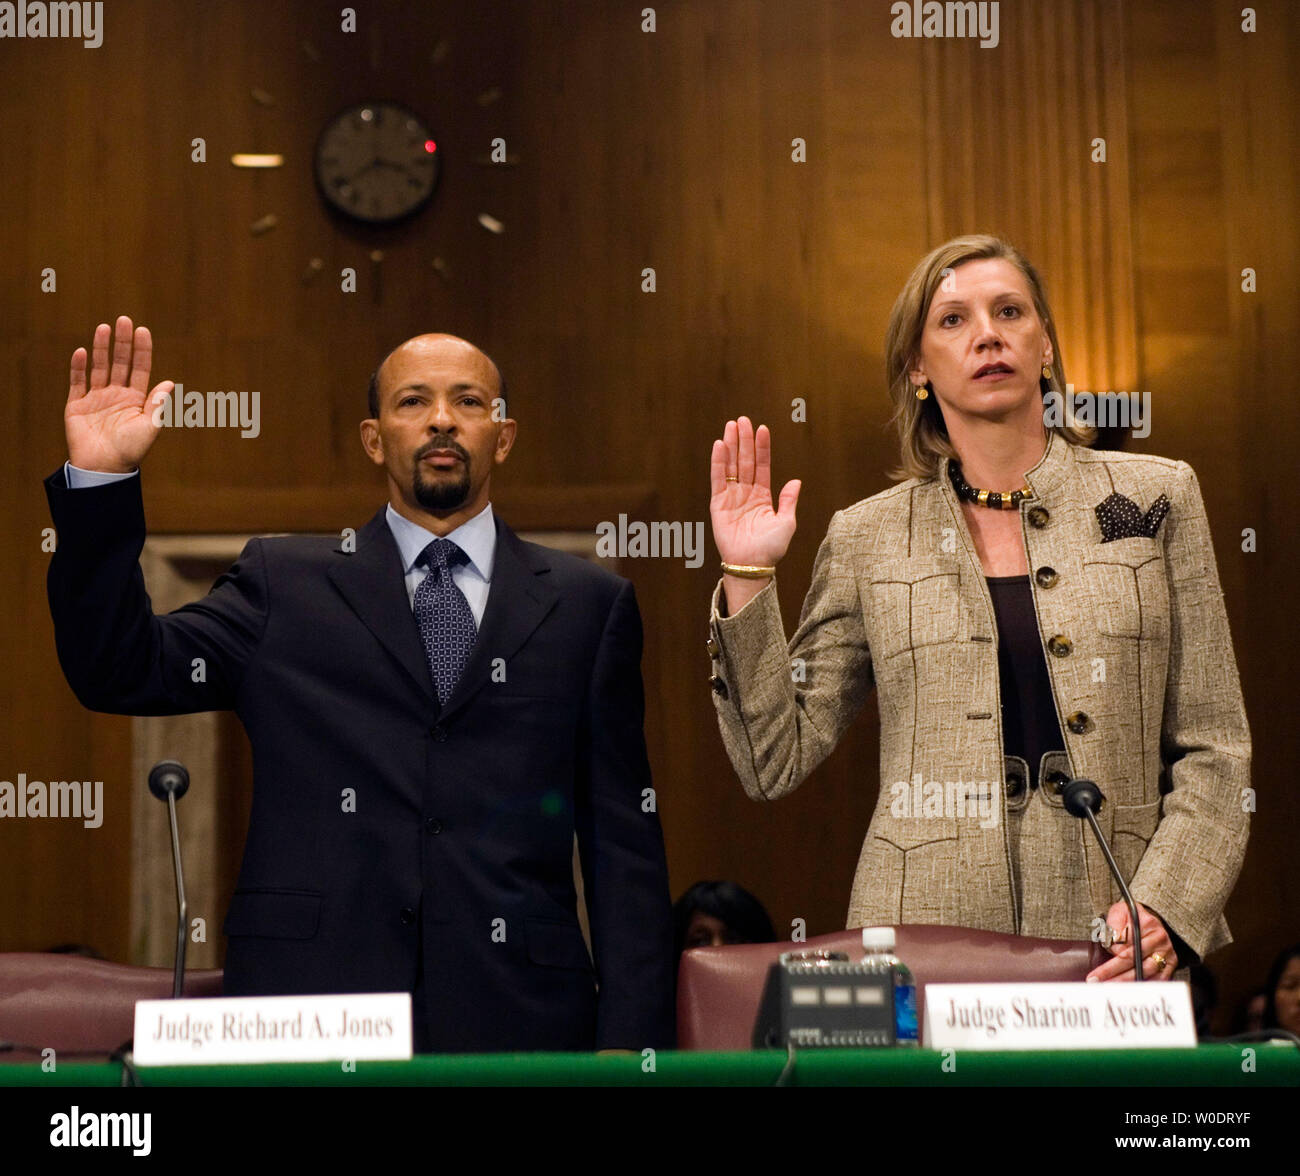 Richard Jones (L), nominee to be U.S. District Judge for the Western District of Washington, and Sharion Aycock, nominee to be U.S. District Judge for the Northern District of Mississippi, are sworn in before the Senate Judiciary Committee at a confirmation hearing on Capitol Hill in Washington on July 19, 2007.   (UPI Photo/David Brody) Stock Photo